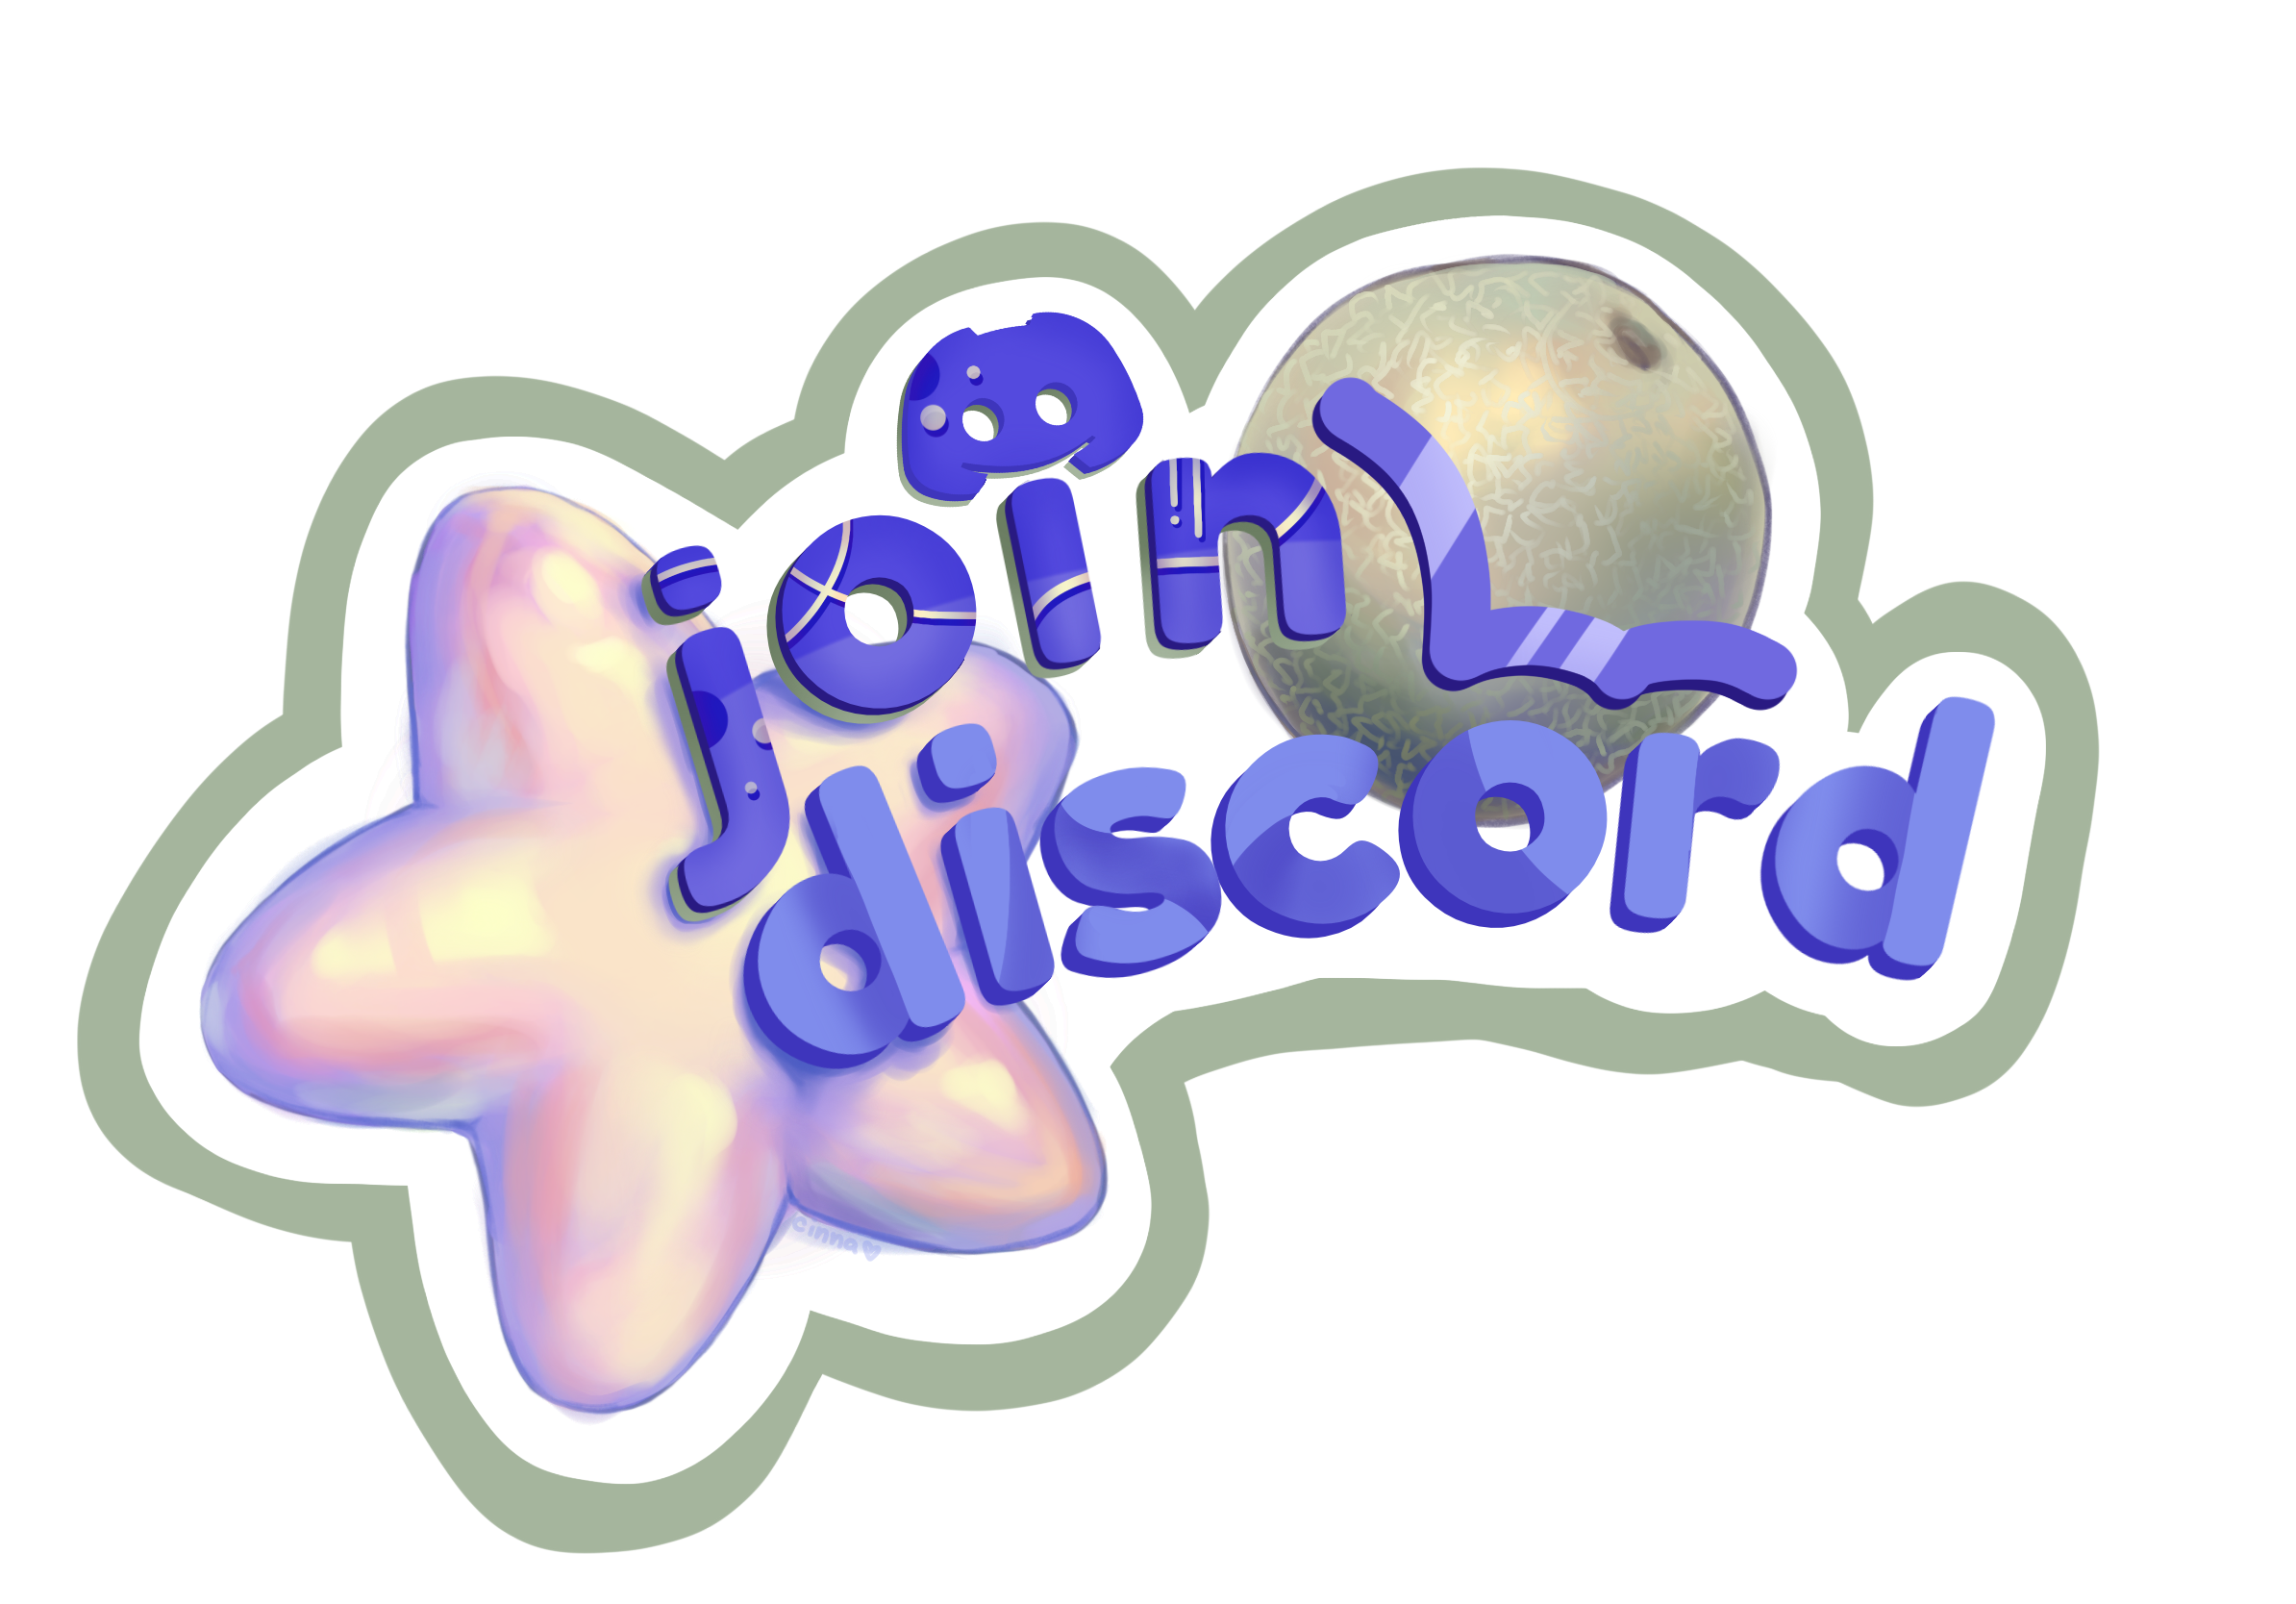 Join the Discord server!